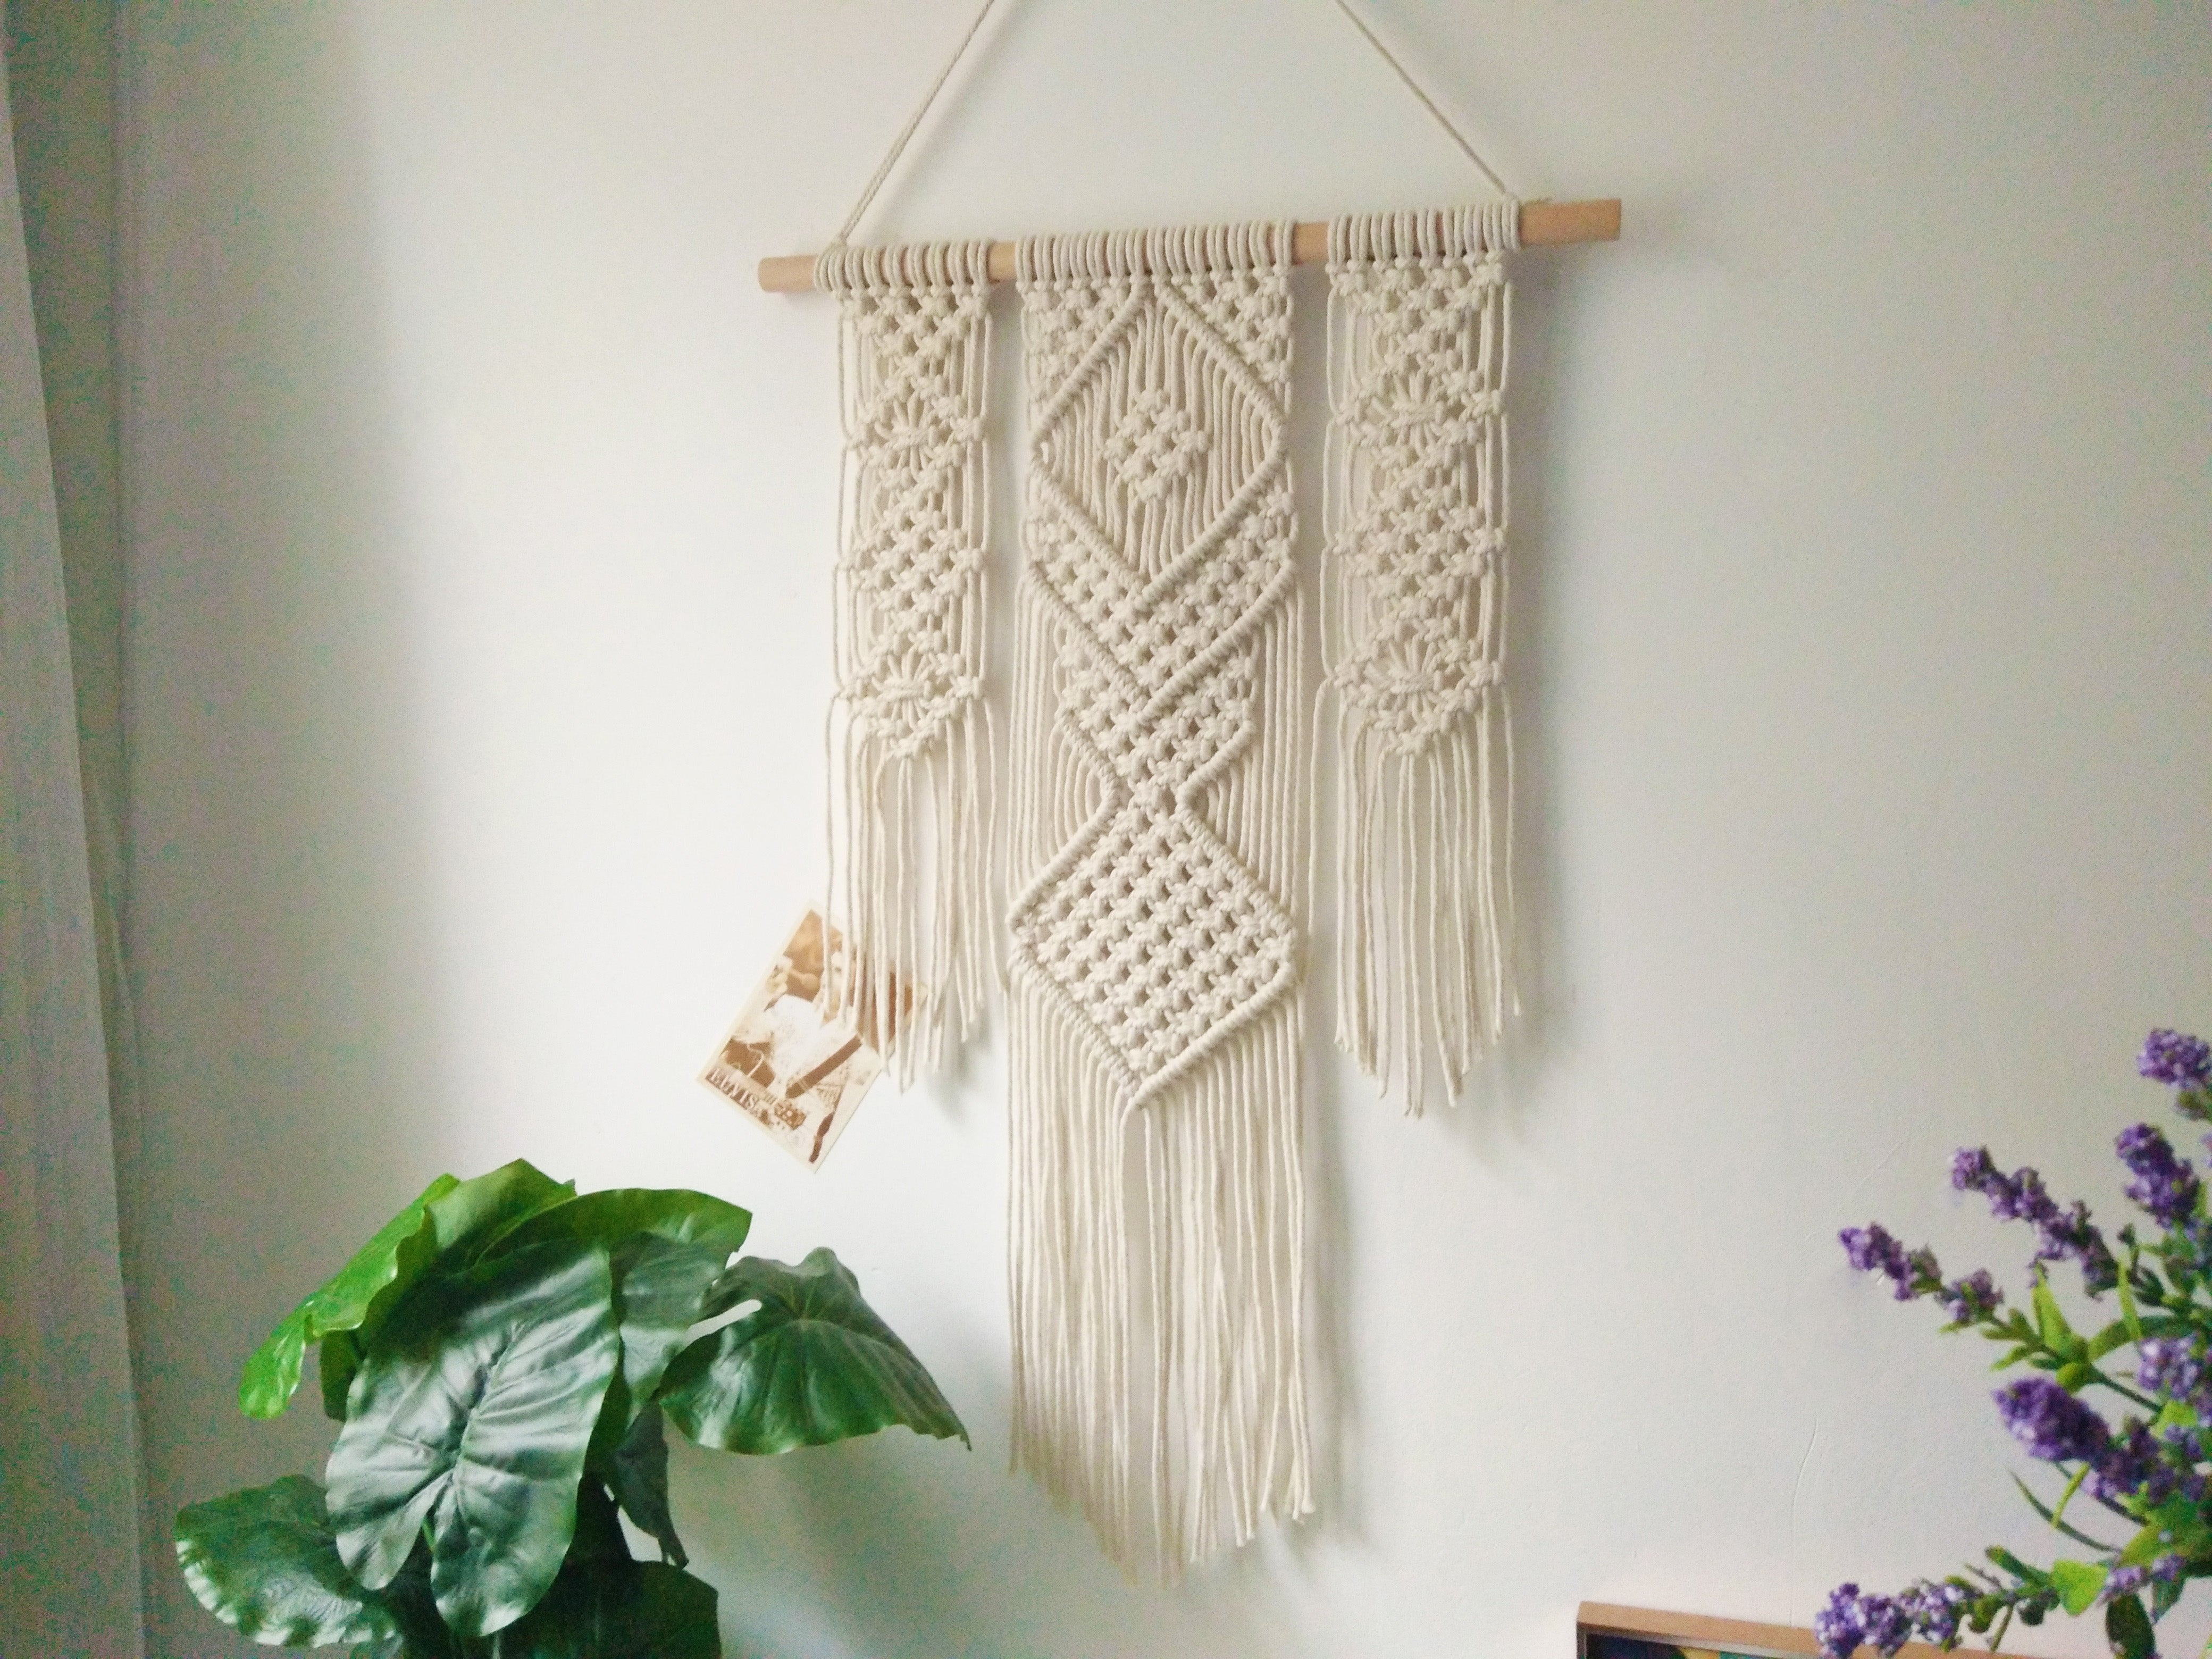 Macrame Wall Hanging Boho Home Decor Chic Woven Decoration for Bedroom Living Room Apartment Dorm Gallery Perfect Handmade Gift Ideas